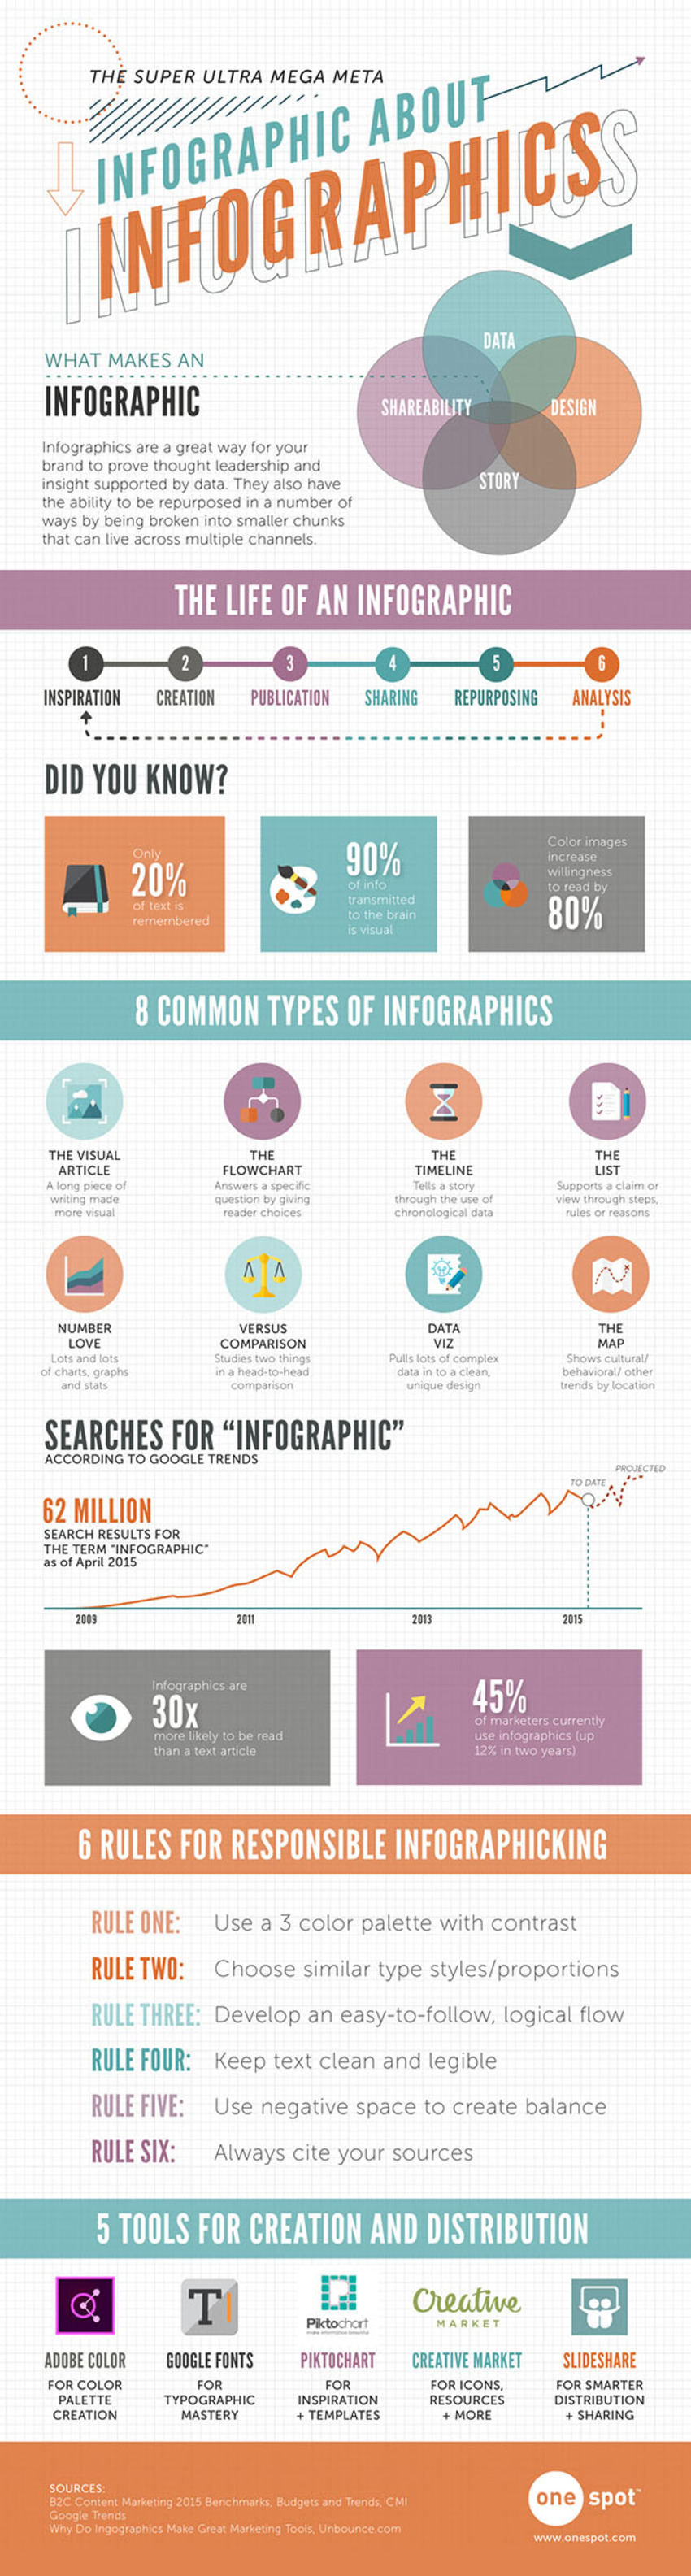 A (Meta) Infographic about Infographics - Unbounce | The MarTech Digest | Scoop.it